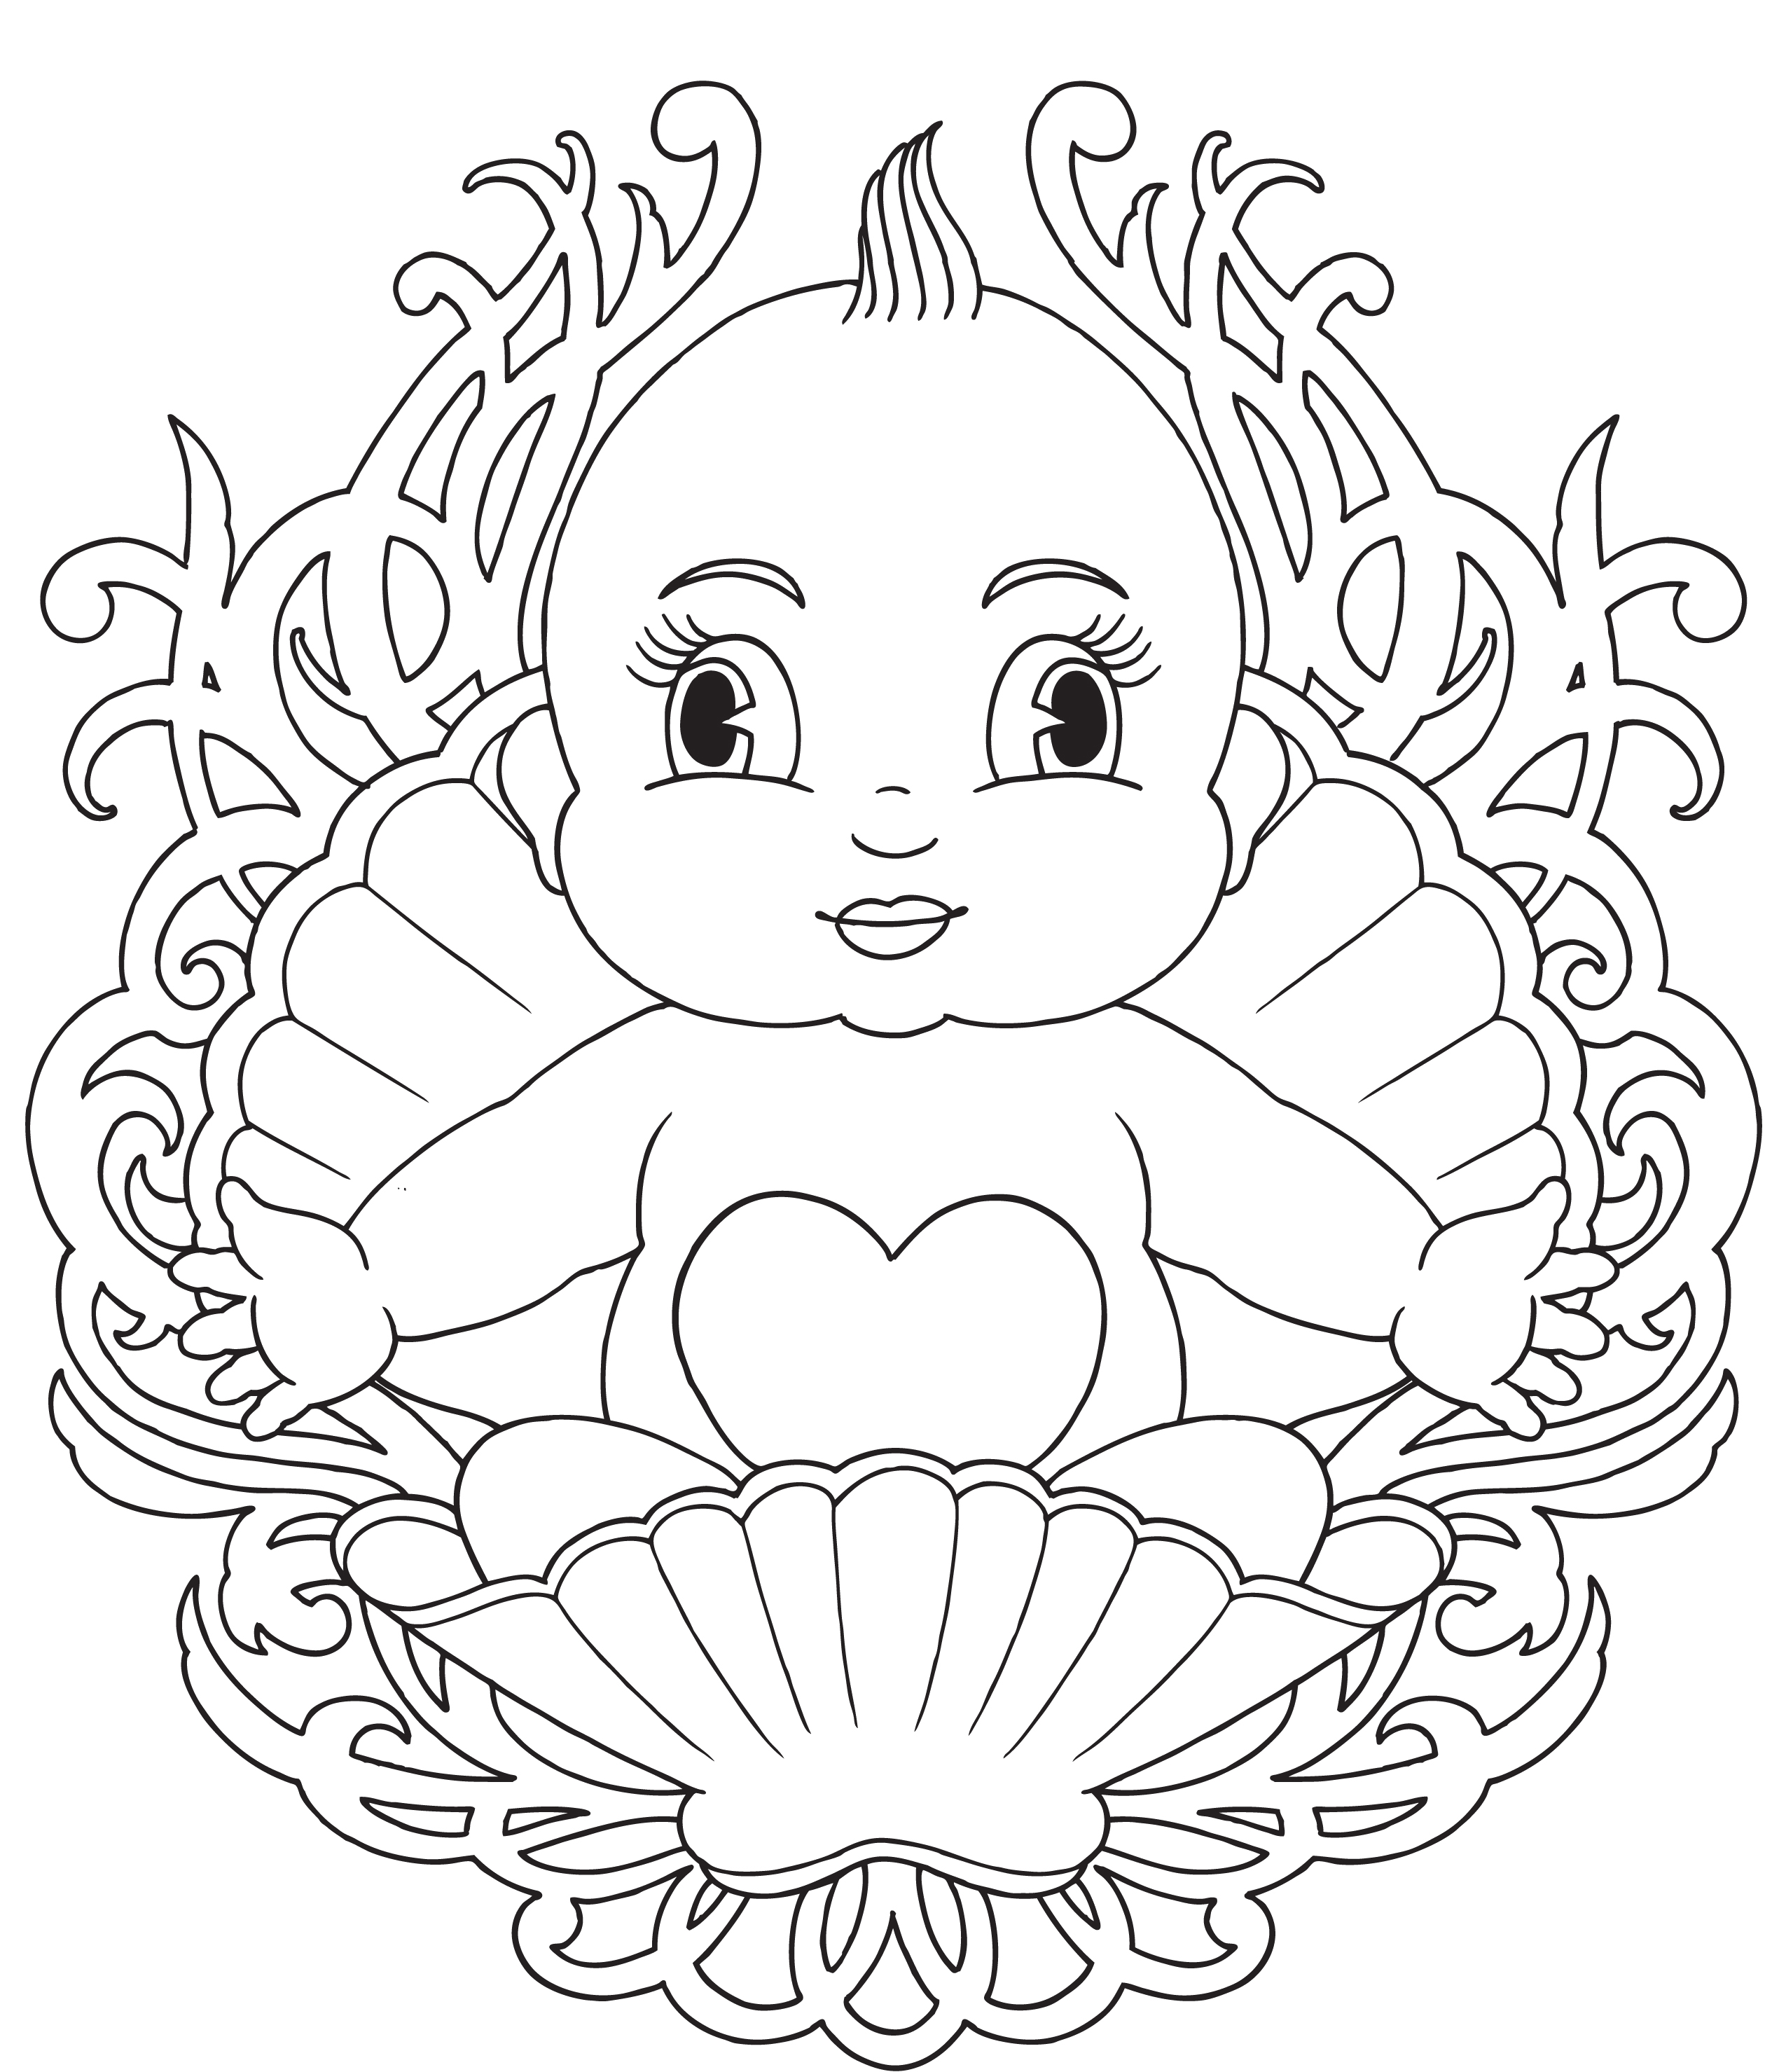 Free Printable Baby Coloring Pages For Kids   Coloring Home